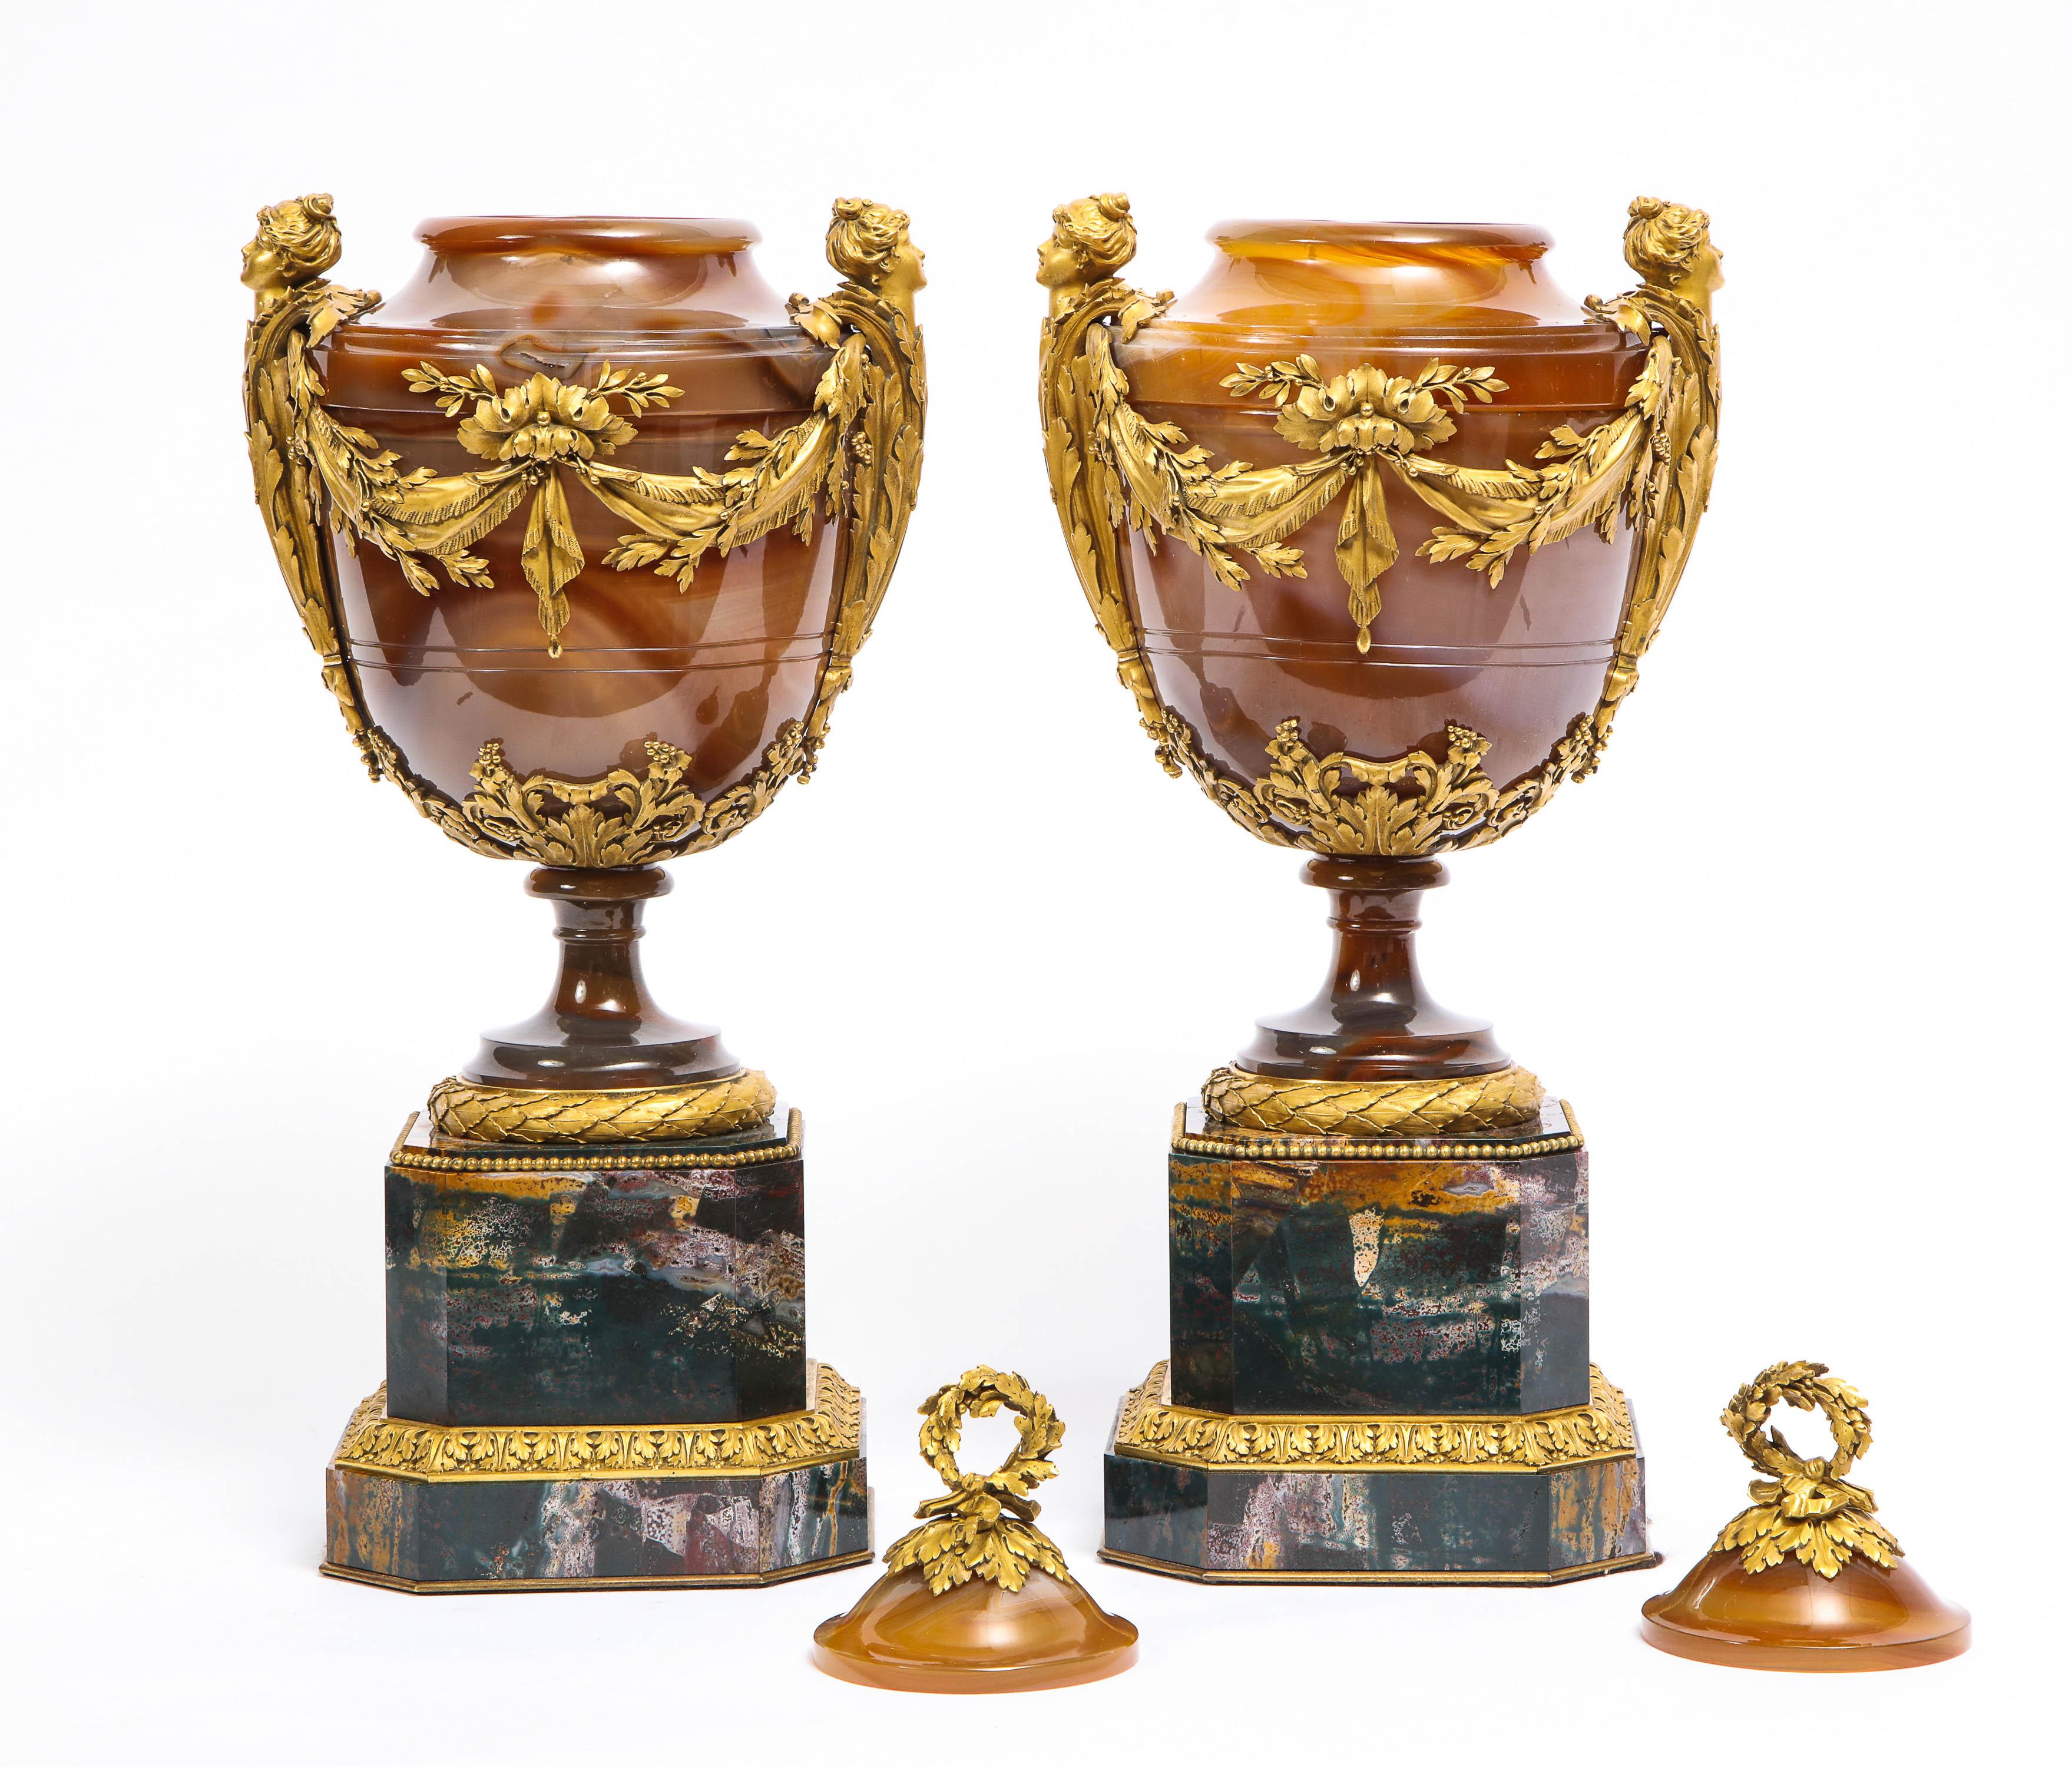 Hand-Carved Important Pair of Russian Imperial Agate and Bloodstone Ormolu Mtd. Jasper Vases